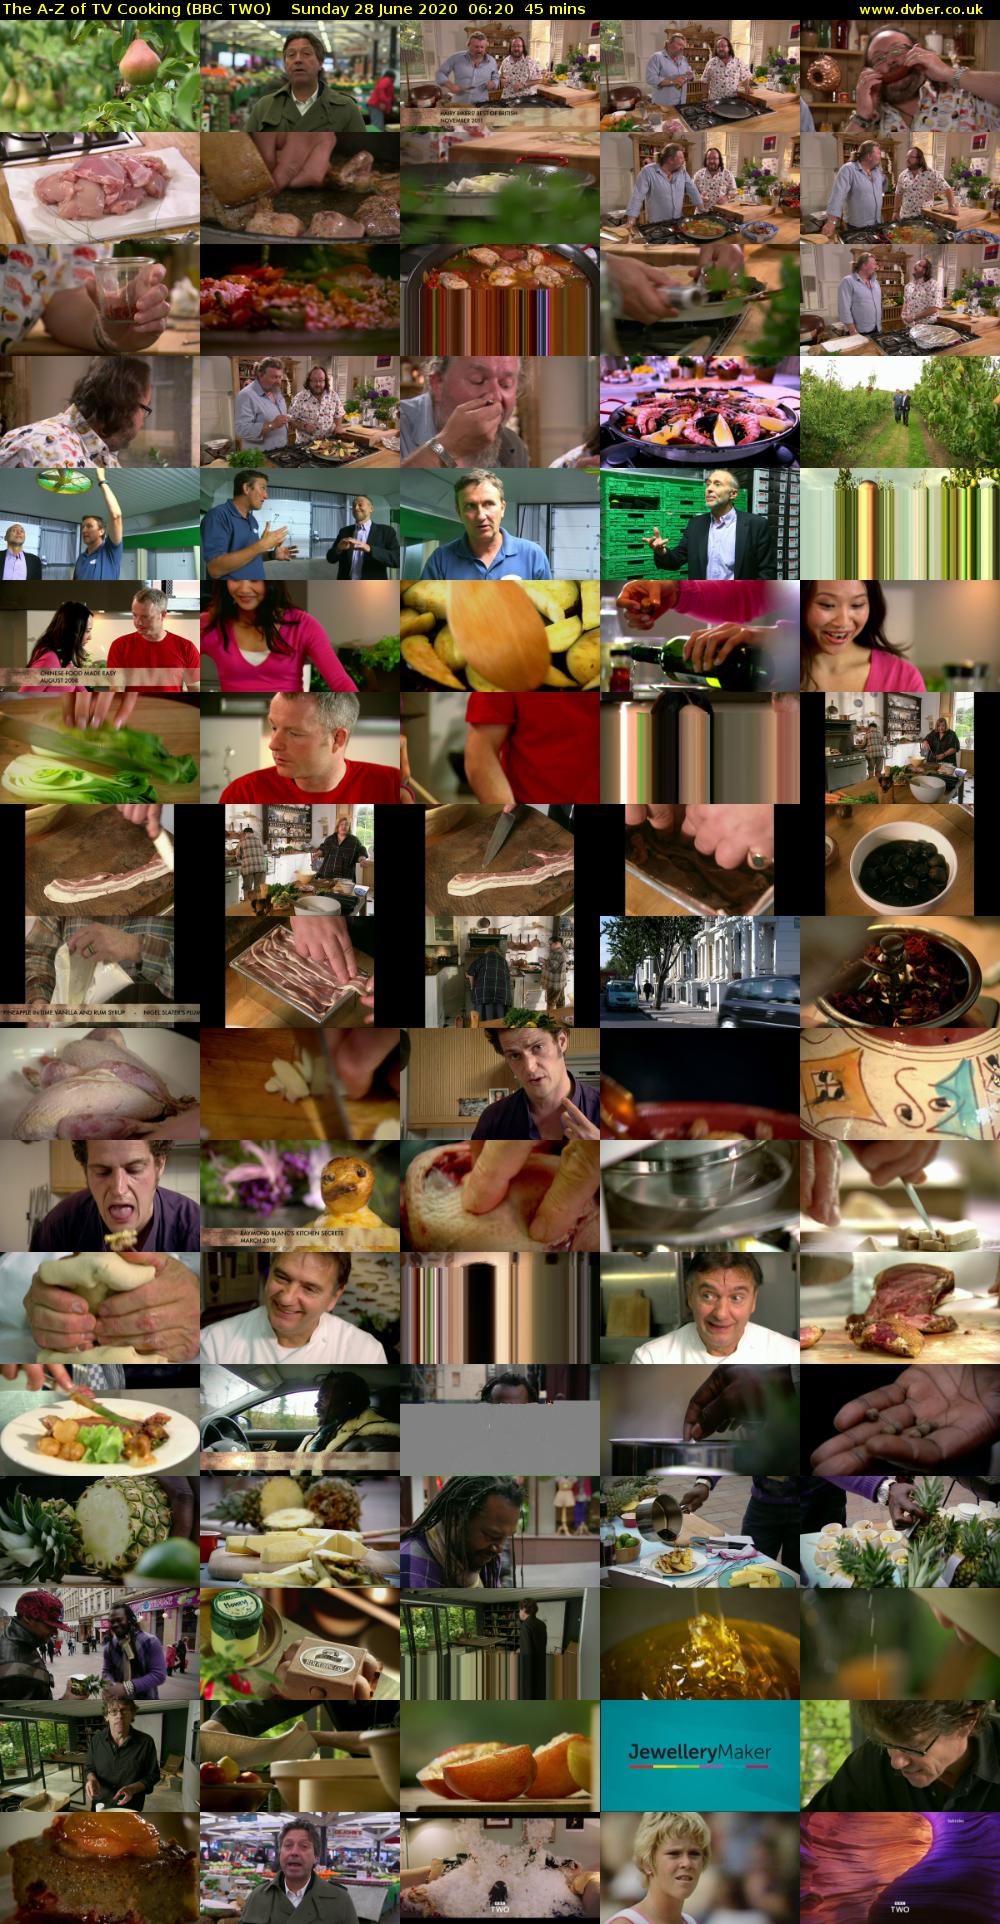 The A-Z of TV Cooking (BBC TWO) Sunday 28 June 2020 06:20 - 07:05